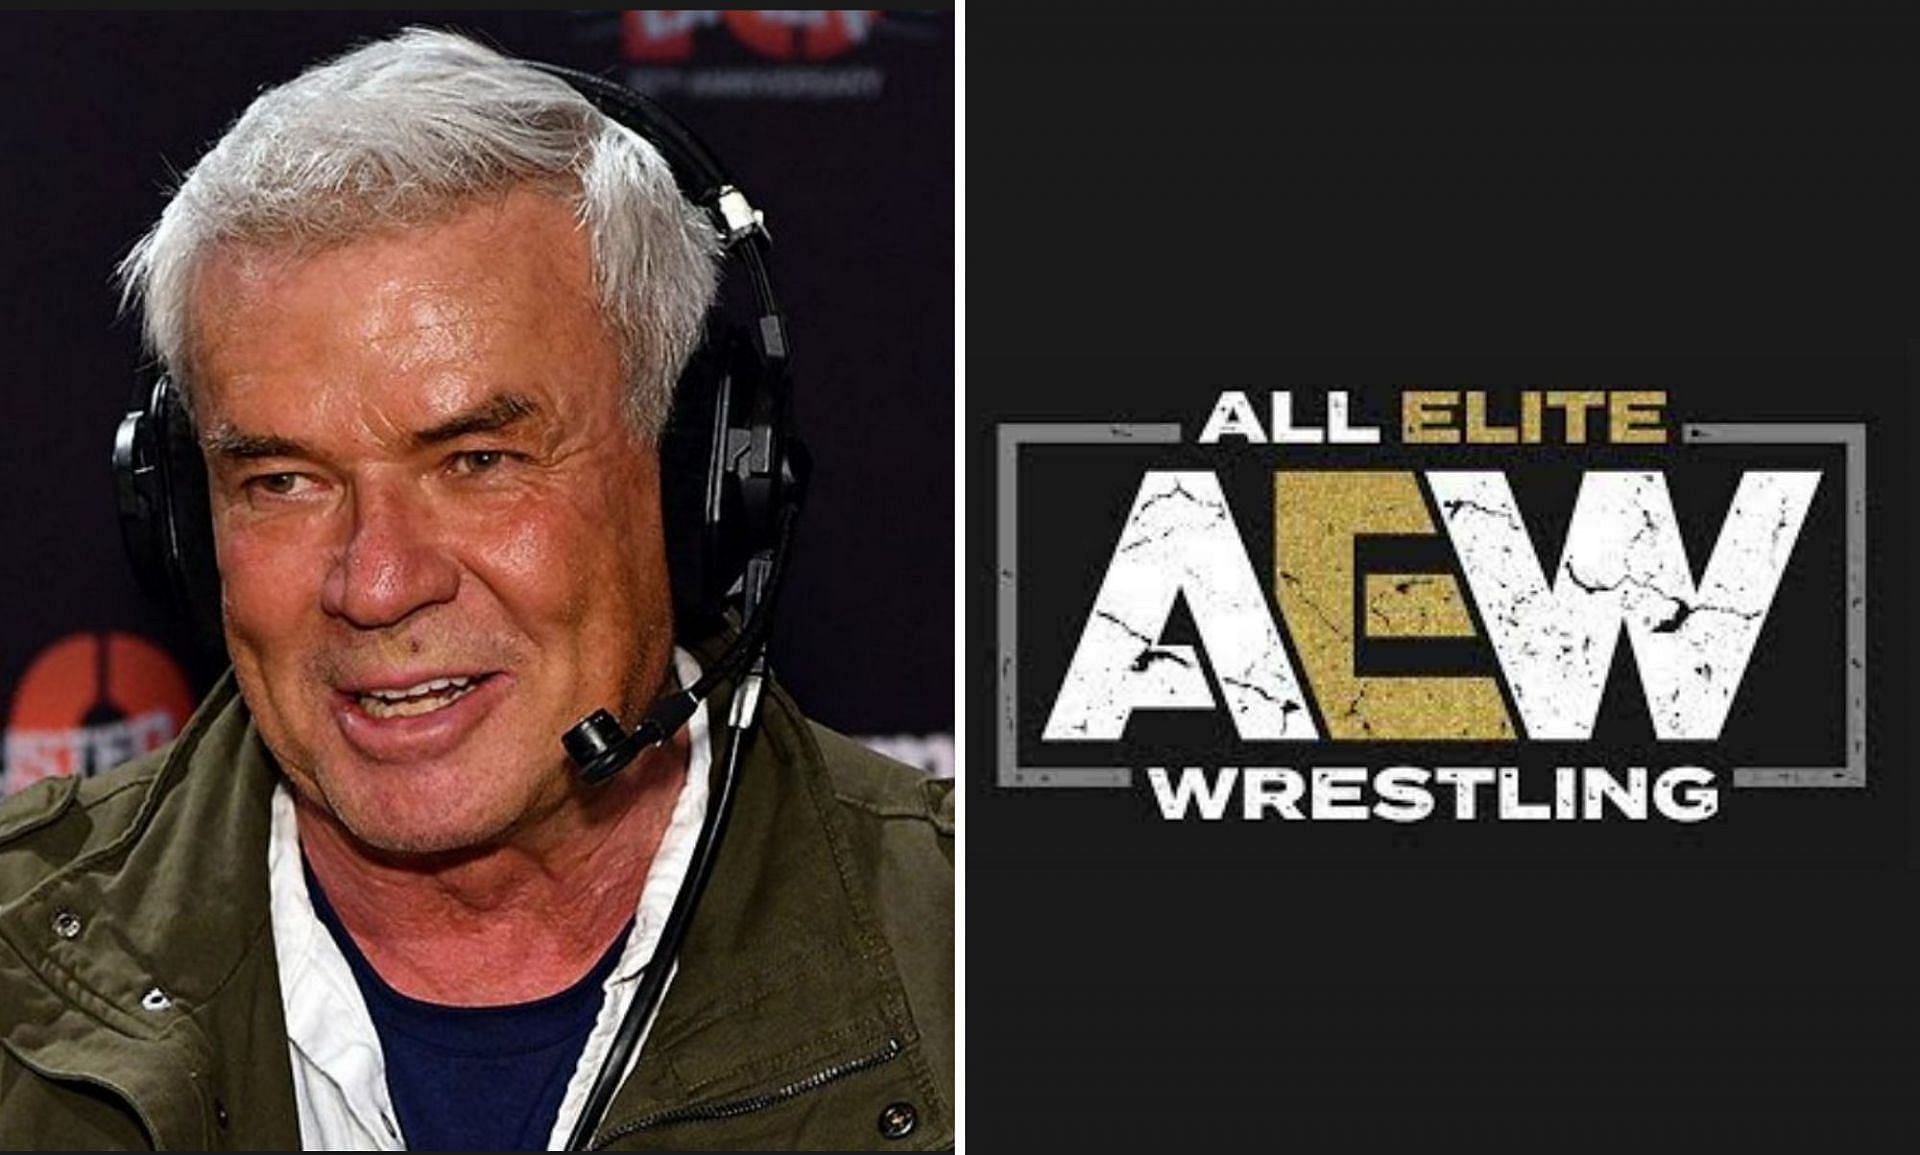 Eric Bischoff is a former WCW personality.